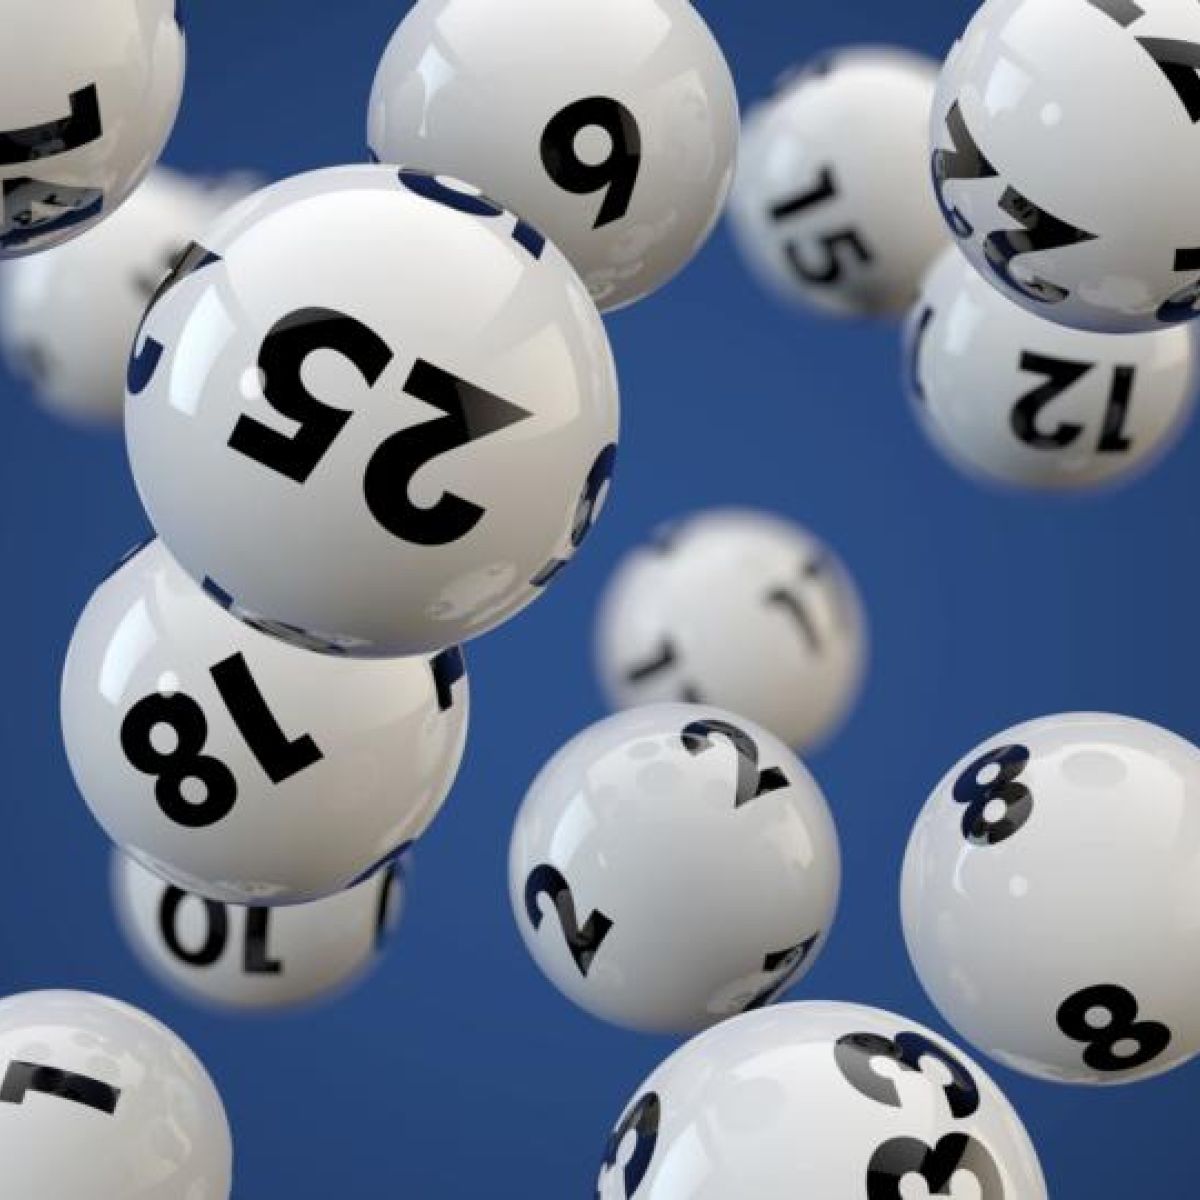 lotto 47 odds